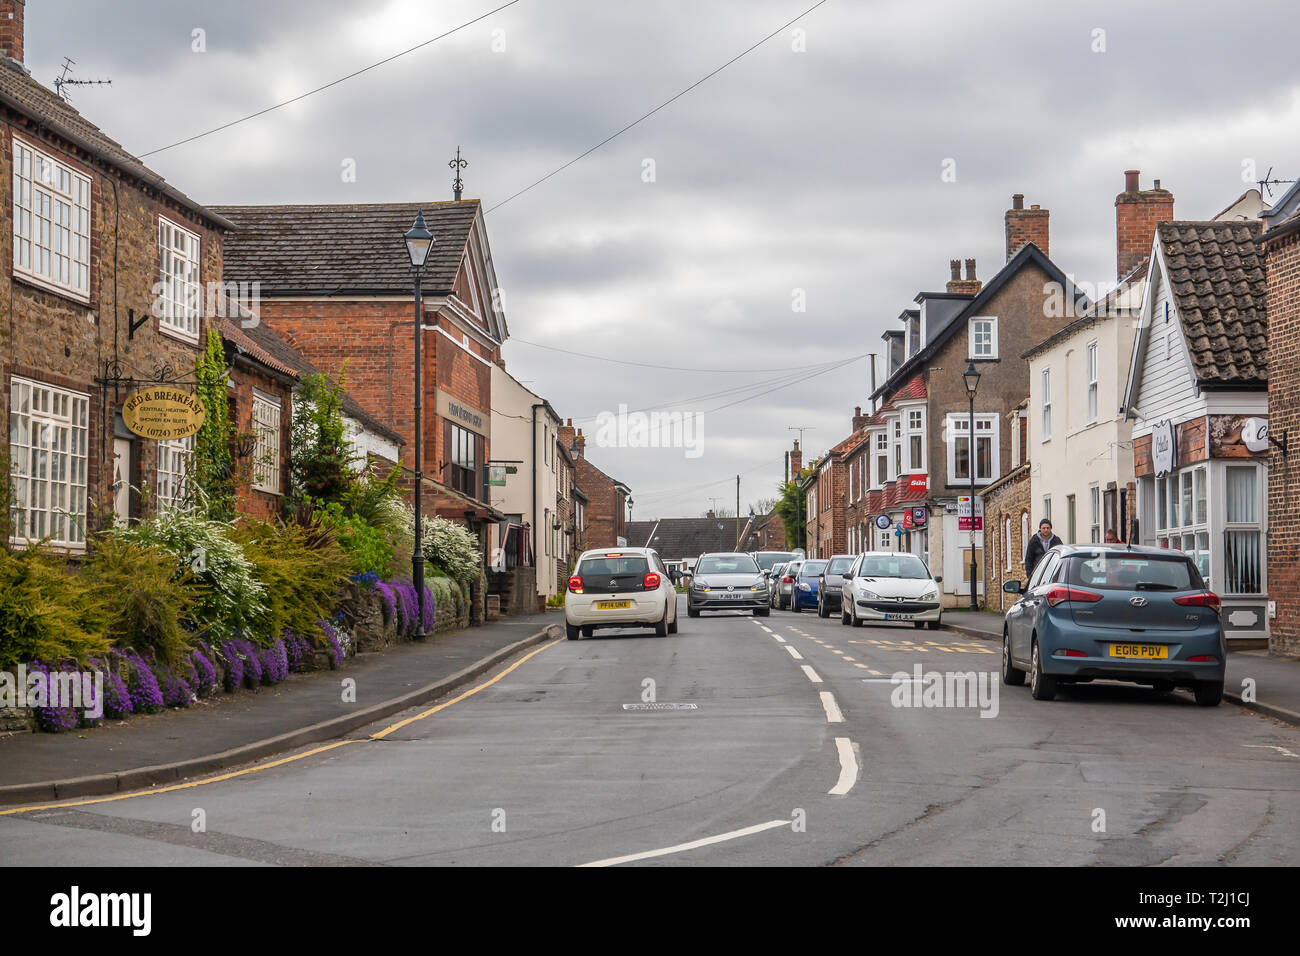 Burton Upon Stather High Resolution Stock Photography and Images - Alamy